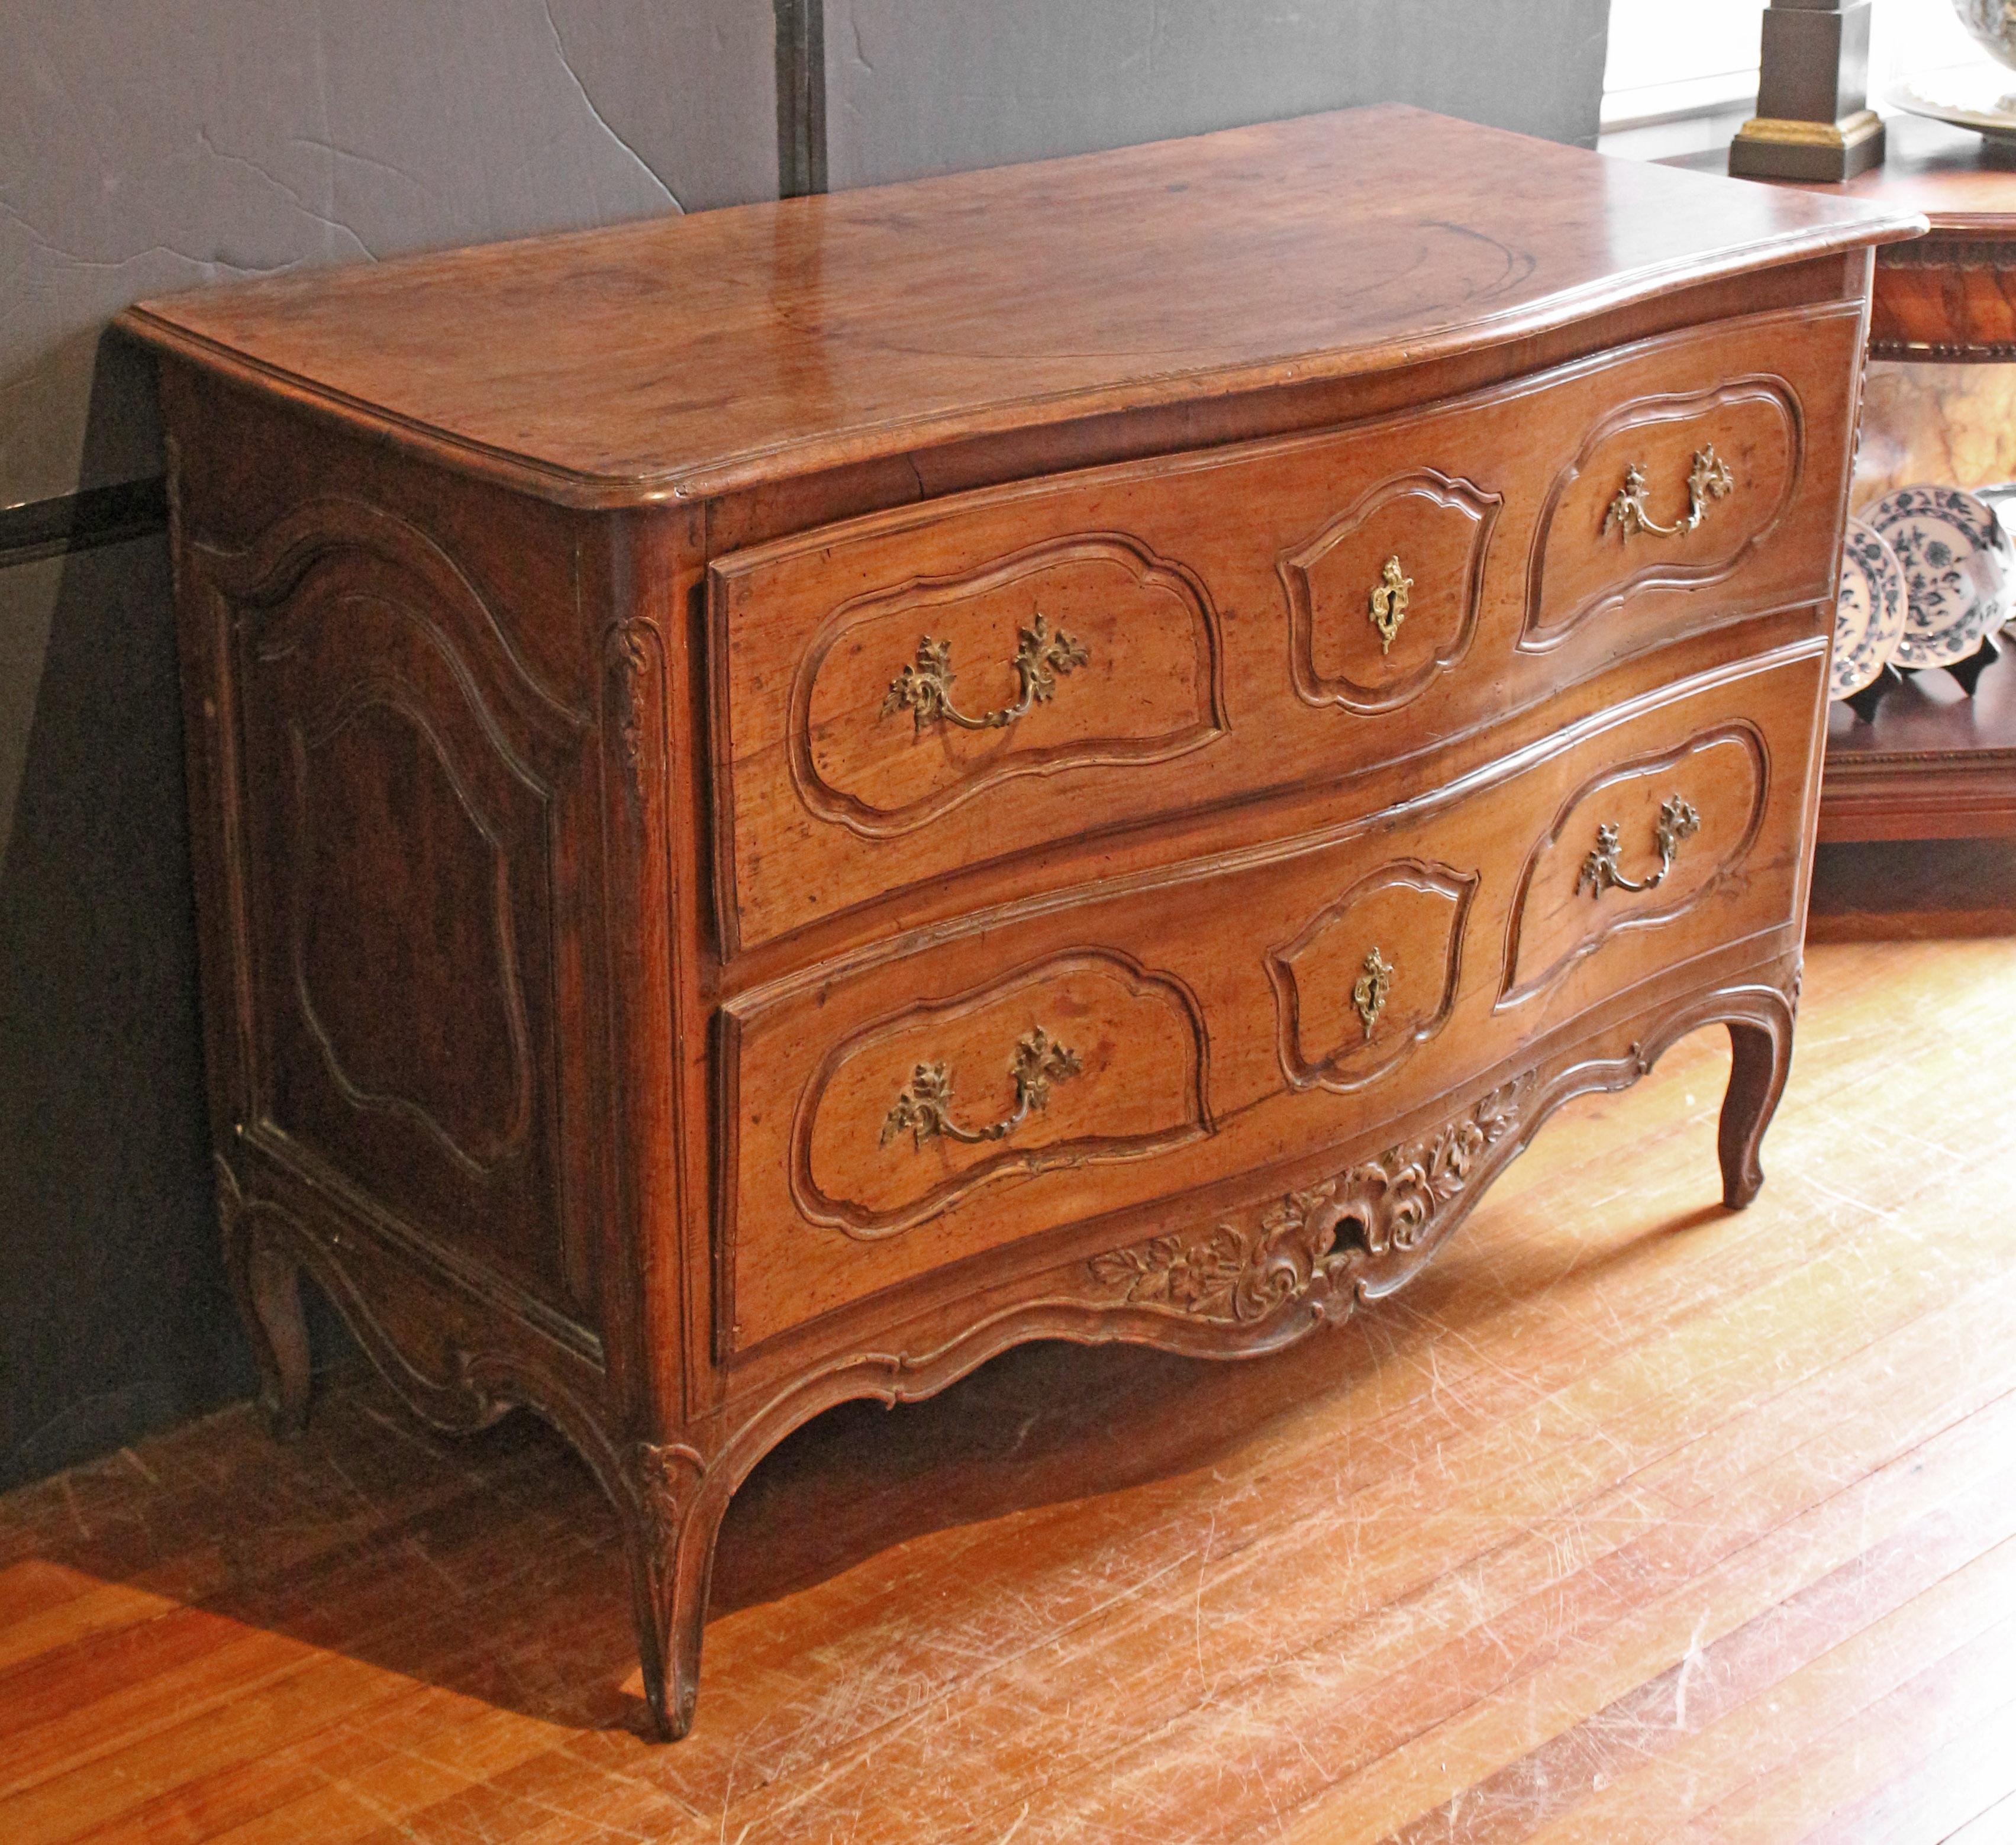 Circa 1735-55 French Rococo Period Commode from Provence In Good Condition For Sale In Chapel Hill, NC